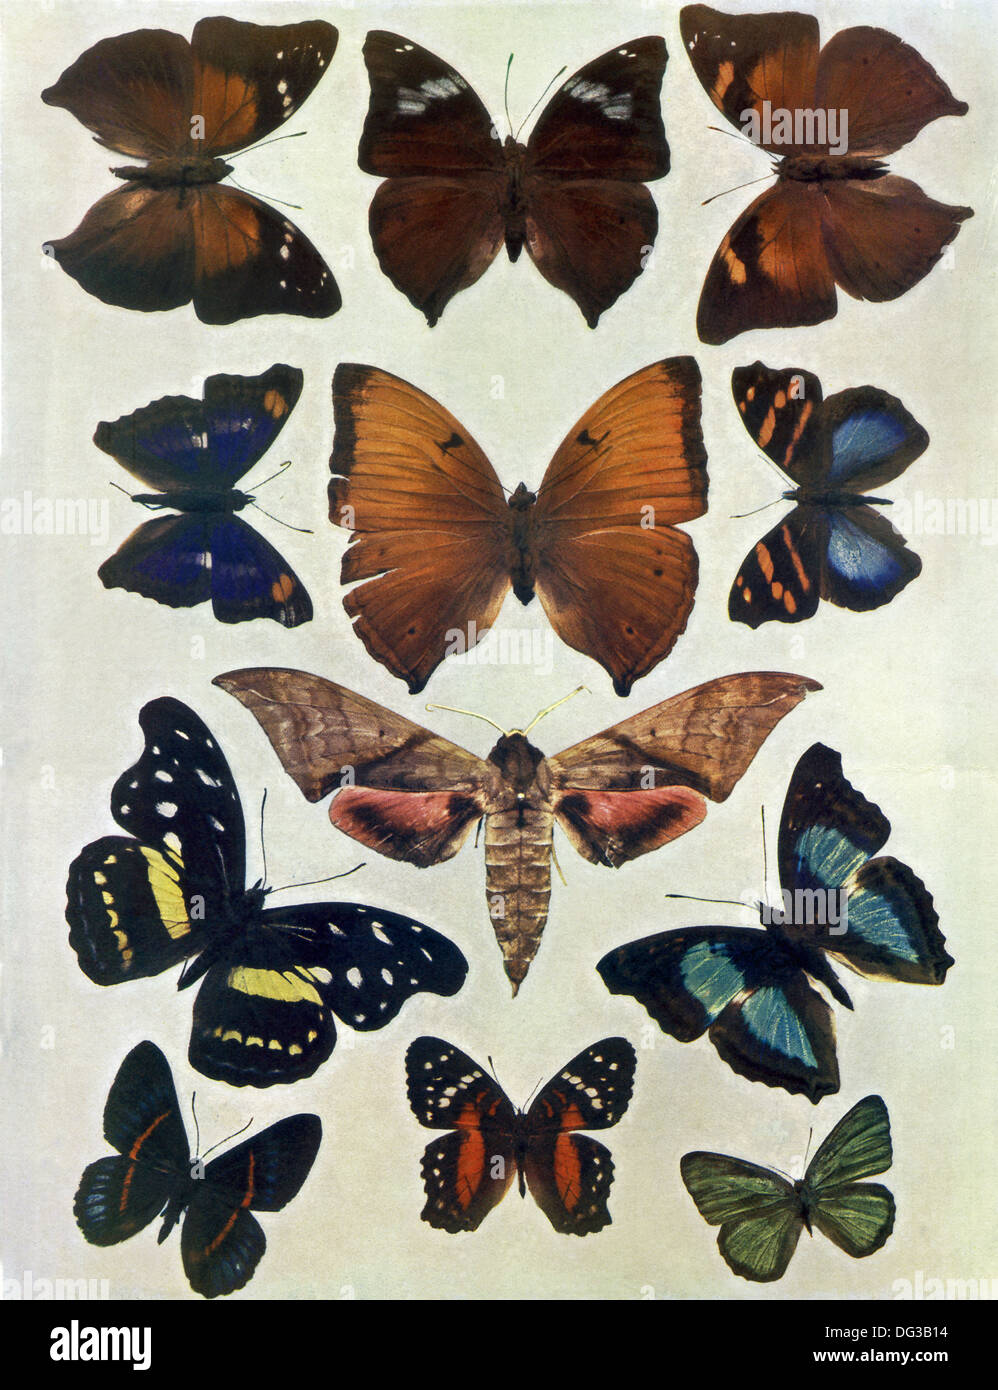 This illustration appeared in the Penrose Pictorial Annual of 1900. This image shows 12 different specimens of butterflies. Stock Photo